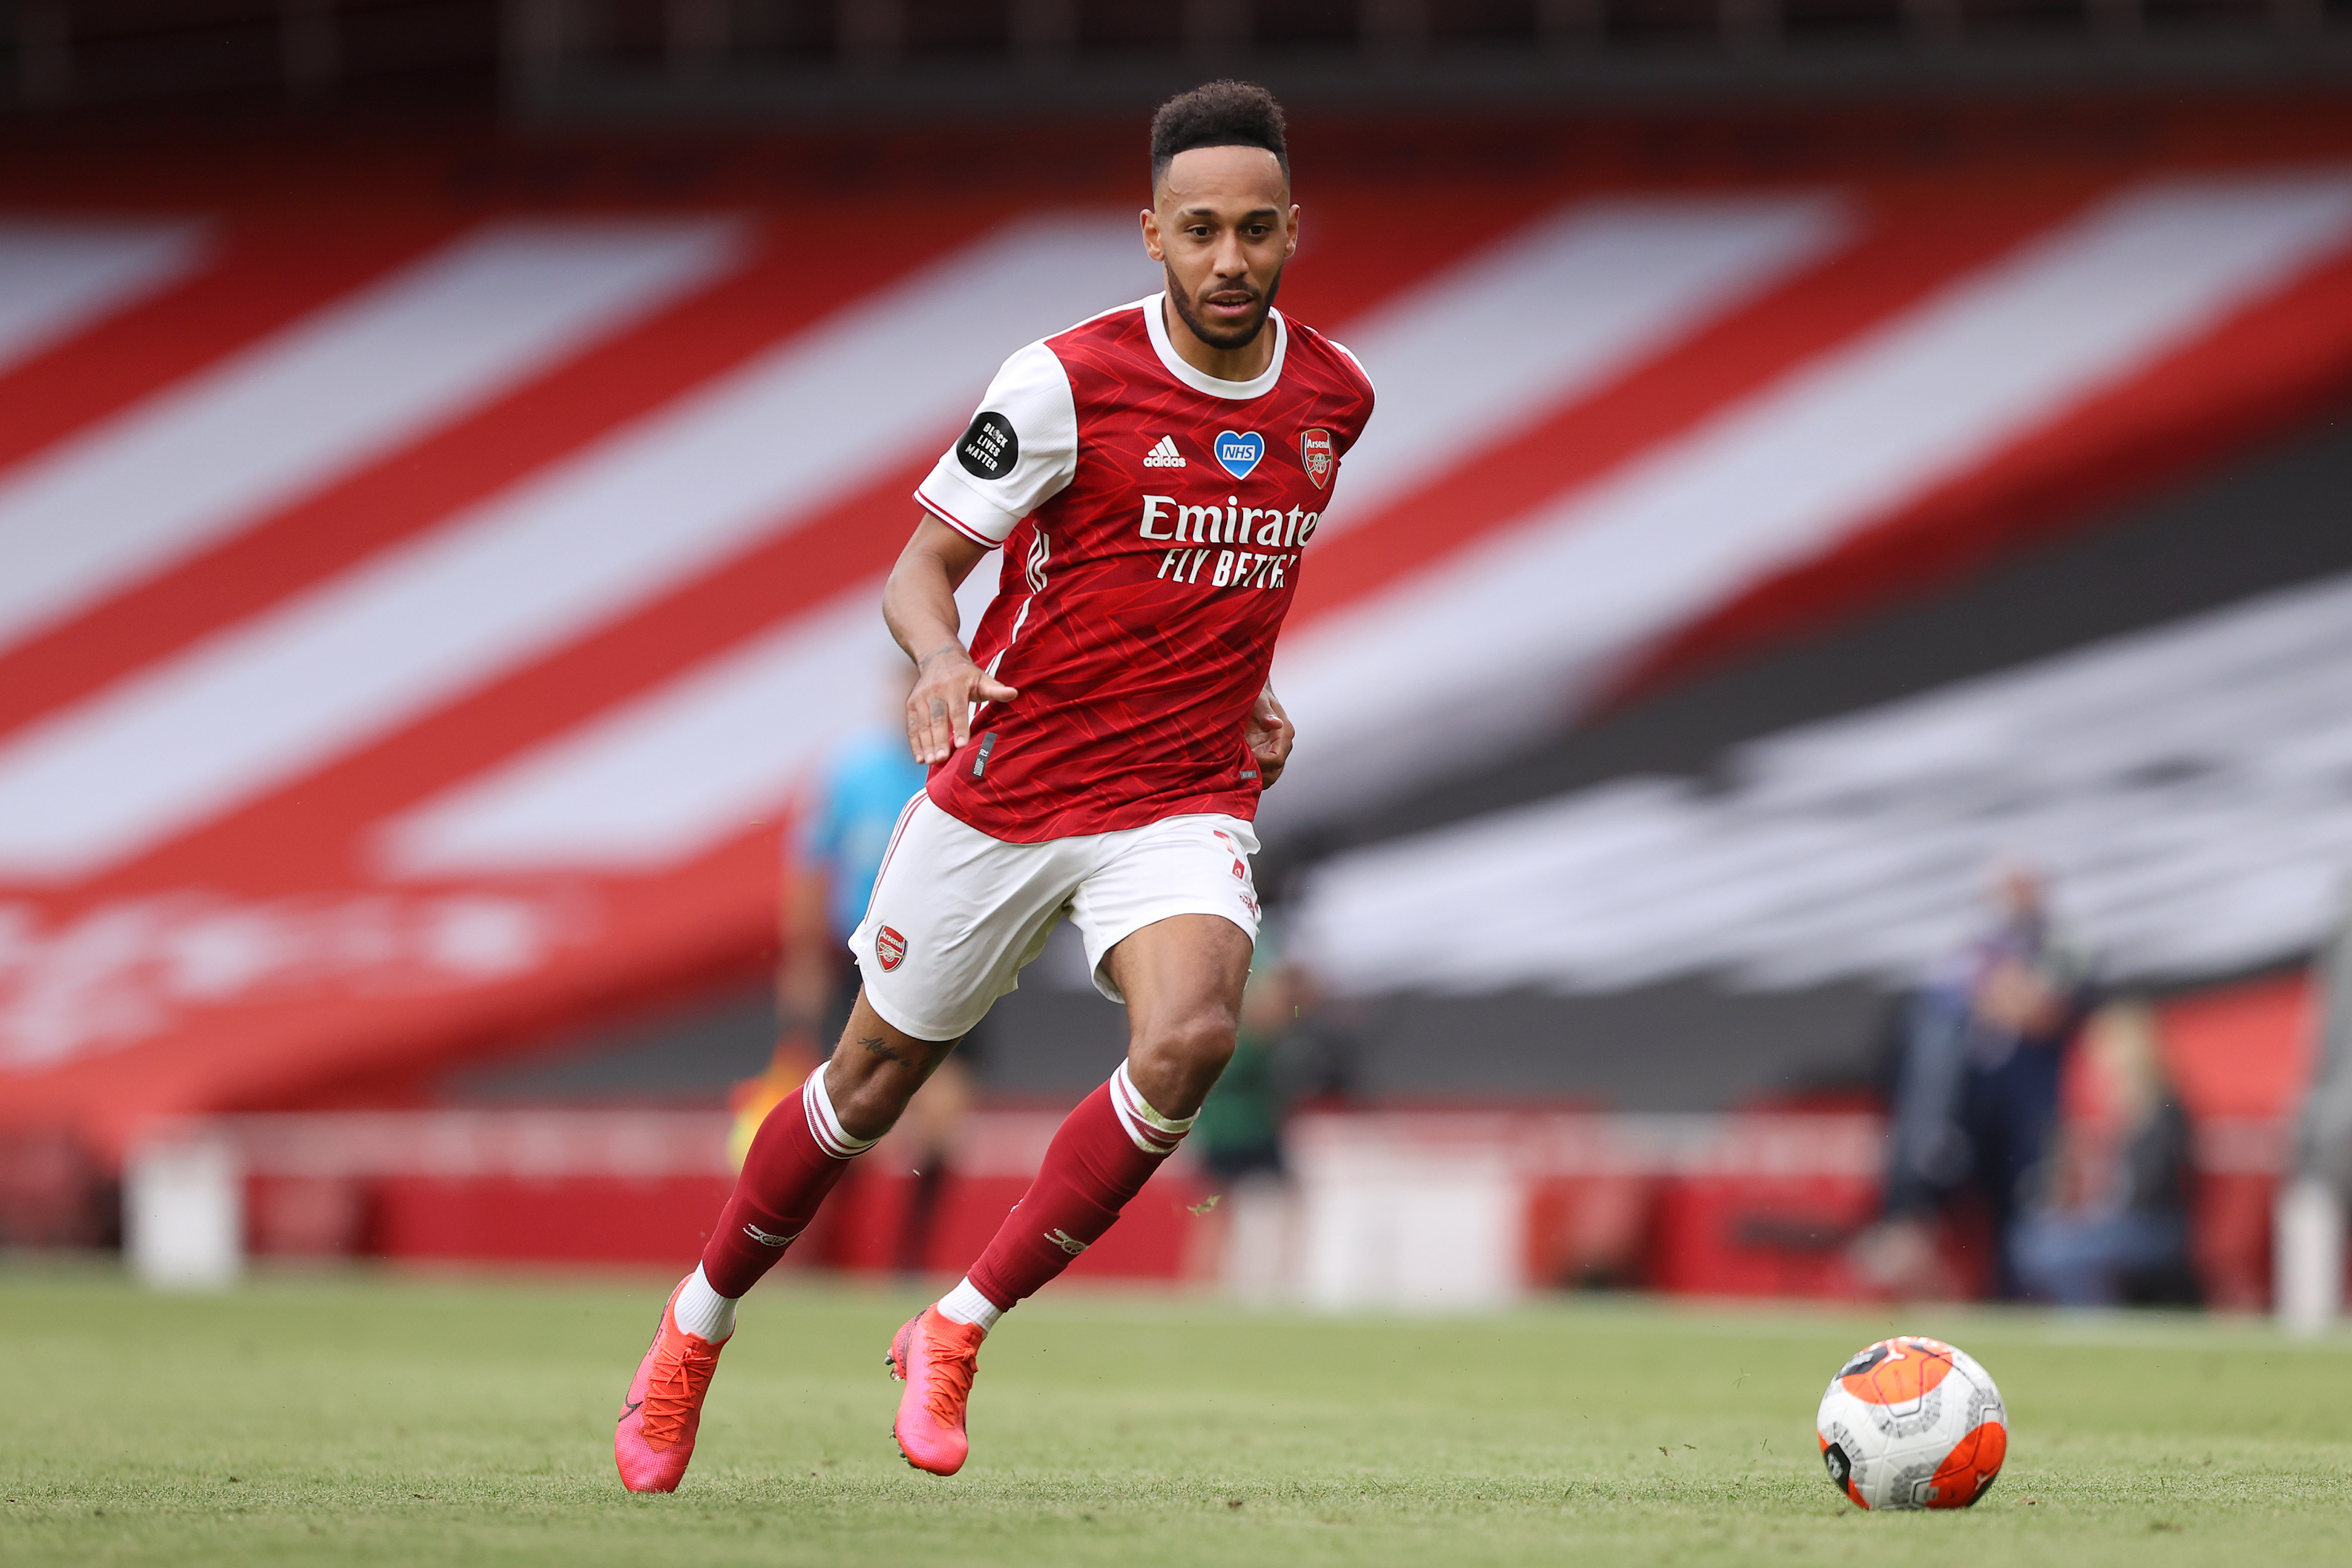 Arsenal transfer rumour round-up: New Aubameyang deal close as Gunners agree terms with Gabriel Magalhaes